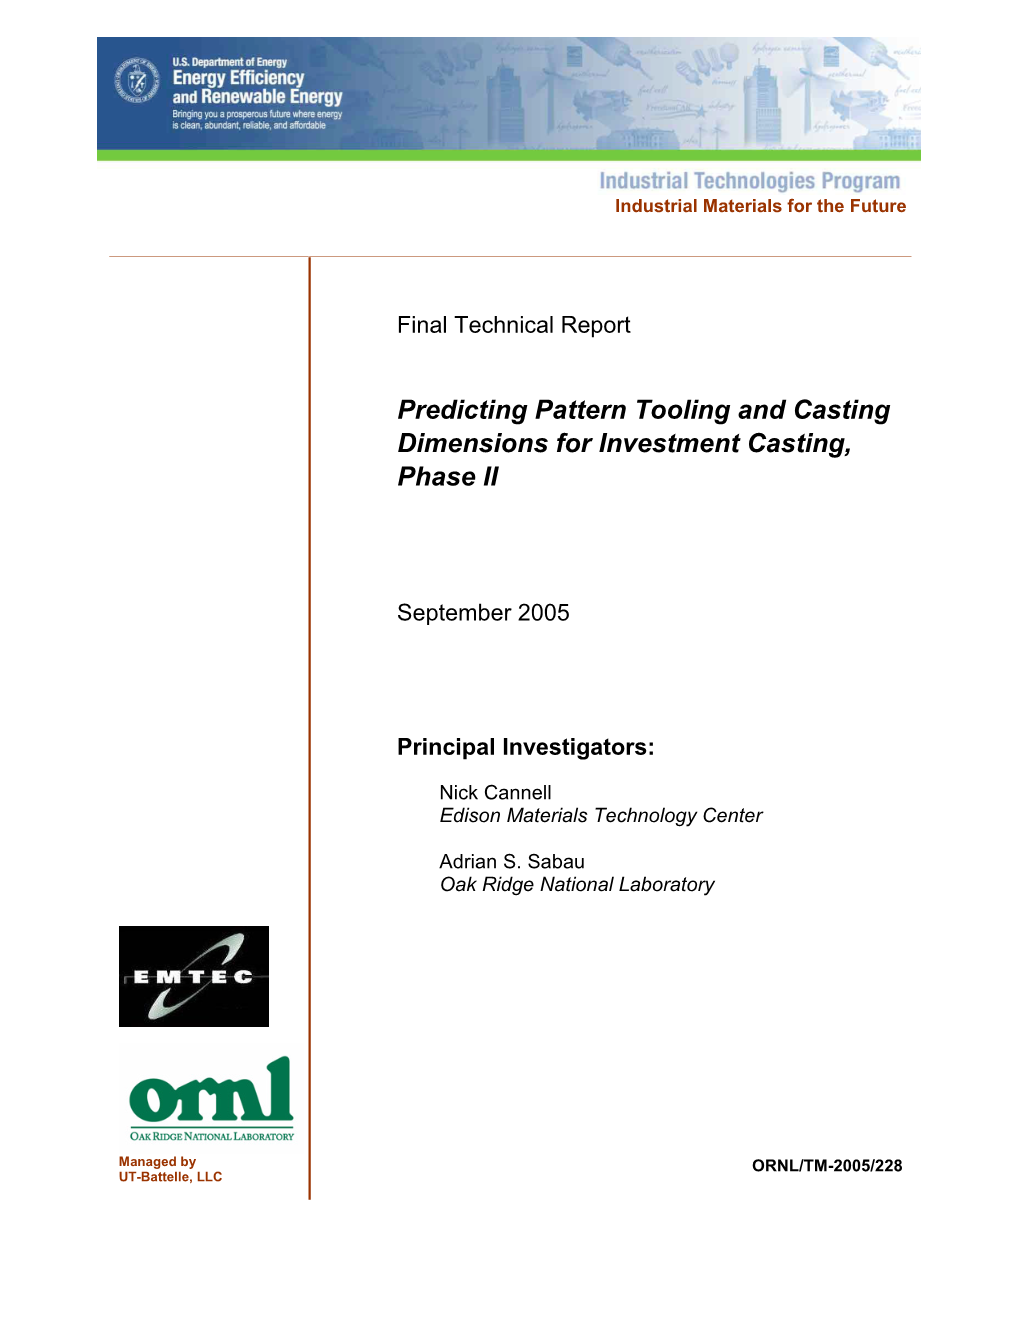 Predicting Pattern Tooling and Casting Dimensions for Investment Casting, Phase II